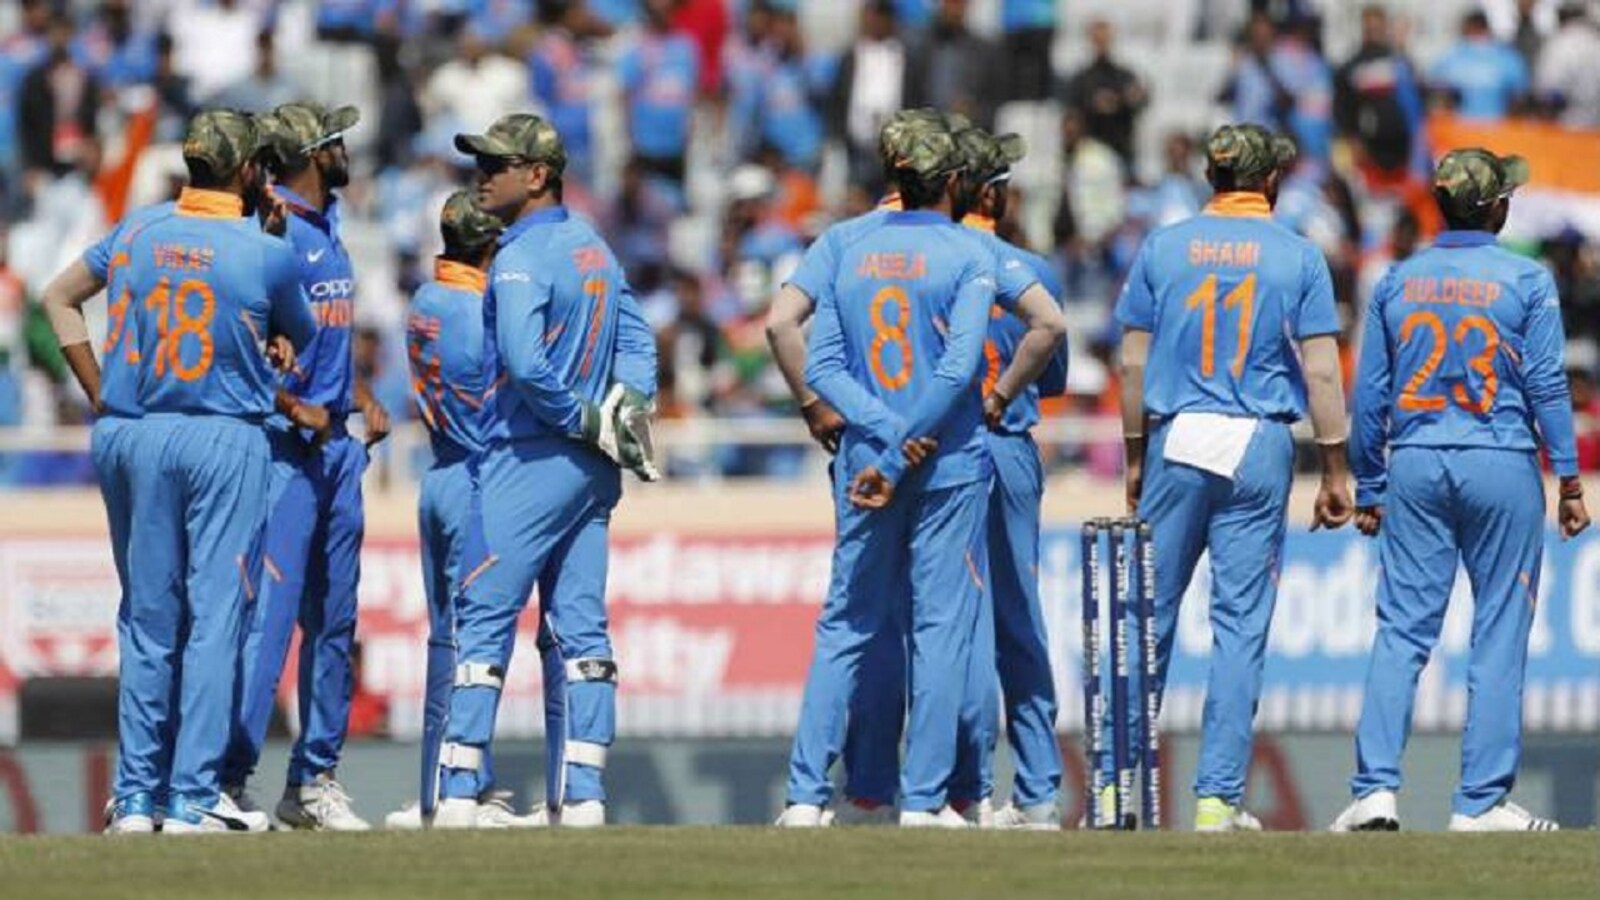 In Pics: Blue Jersey Of Team India At T20 World Cup Over The Years